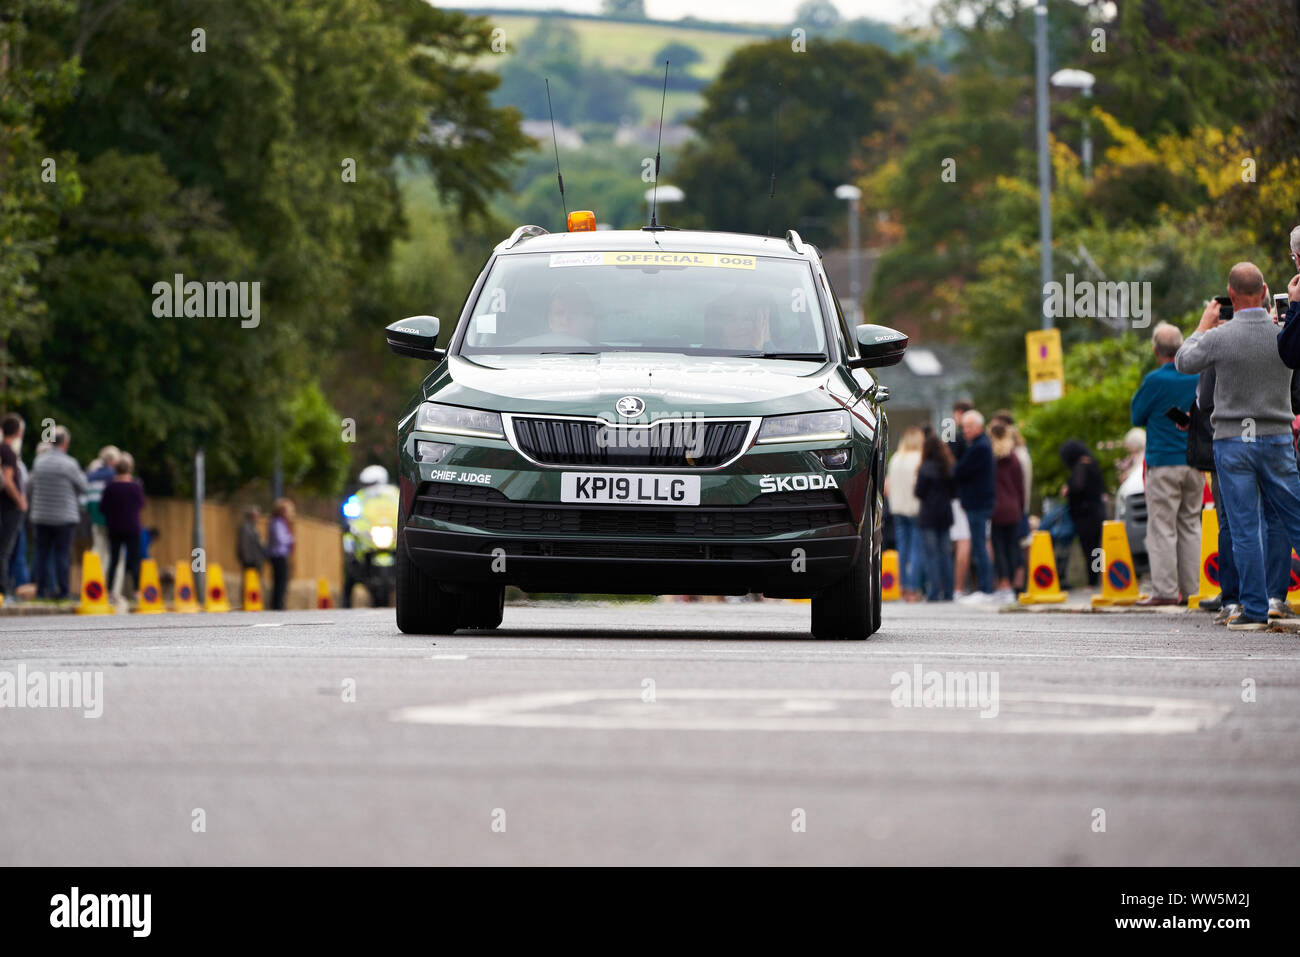 WHICKHAM, NEWCASTLE UPON TYNE, ENGLAND, UK - SEPTEMBER 09, 2019: The official Chief Judge car at the first sprint points line of Stage 4 of the Tour o Stock Photo